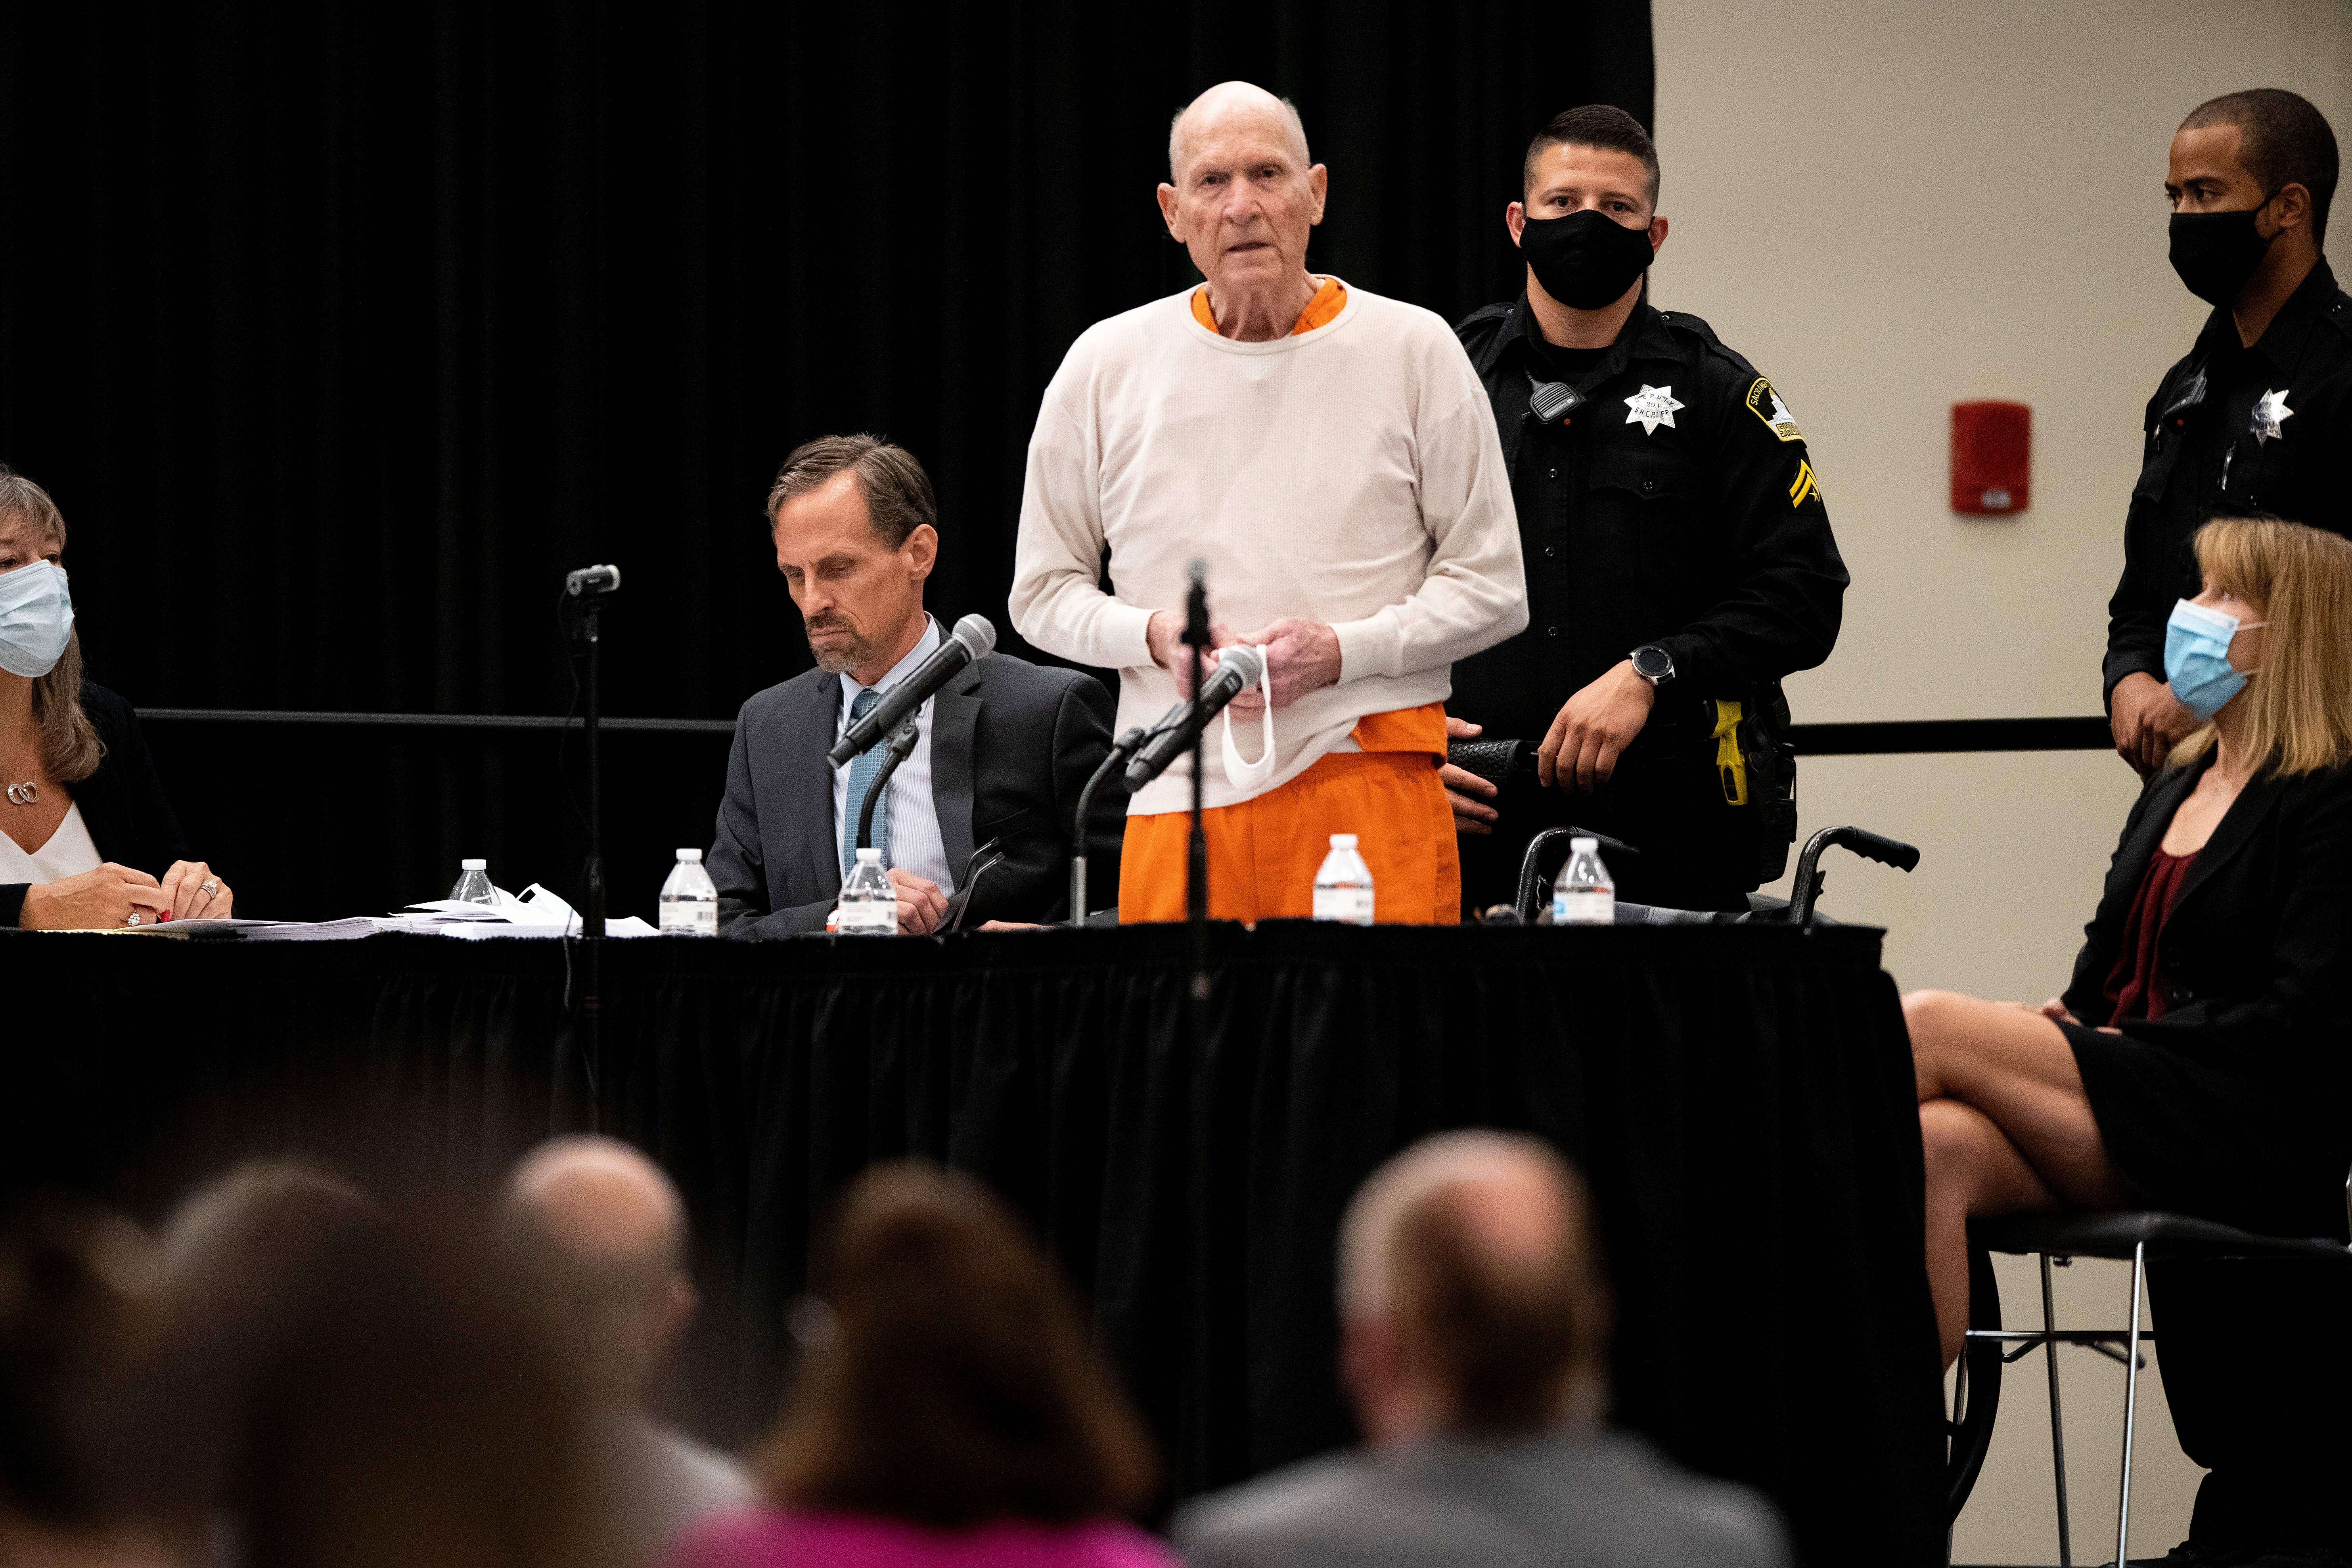 Joseph James DeAngelo is photographed as he speaks at his sentencing hearing held in Sacramento, California, on August 21, 2020. | Source: Getty Images